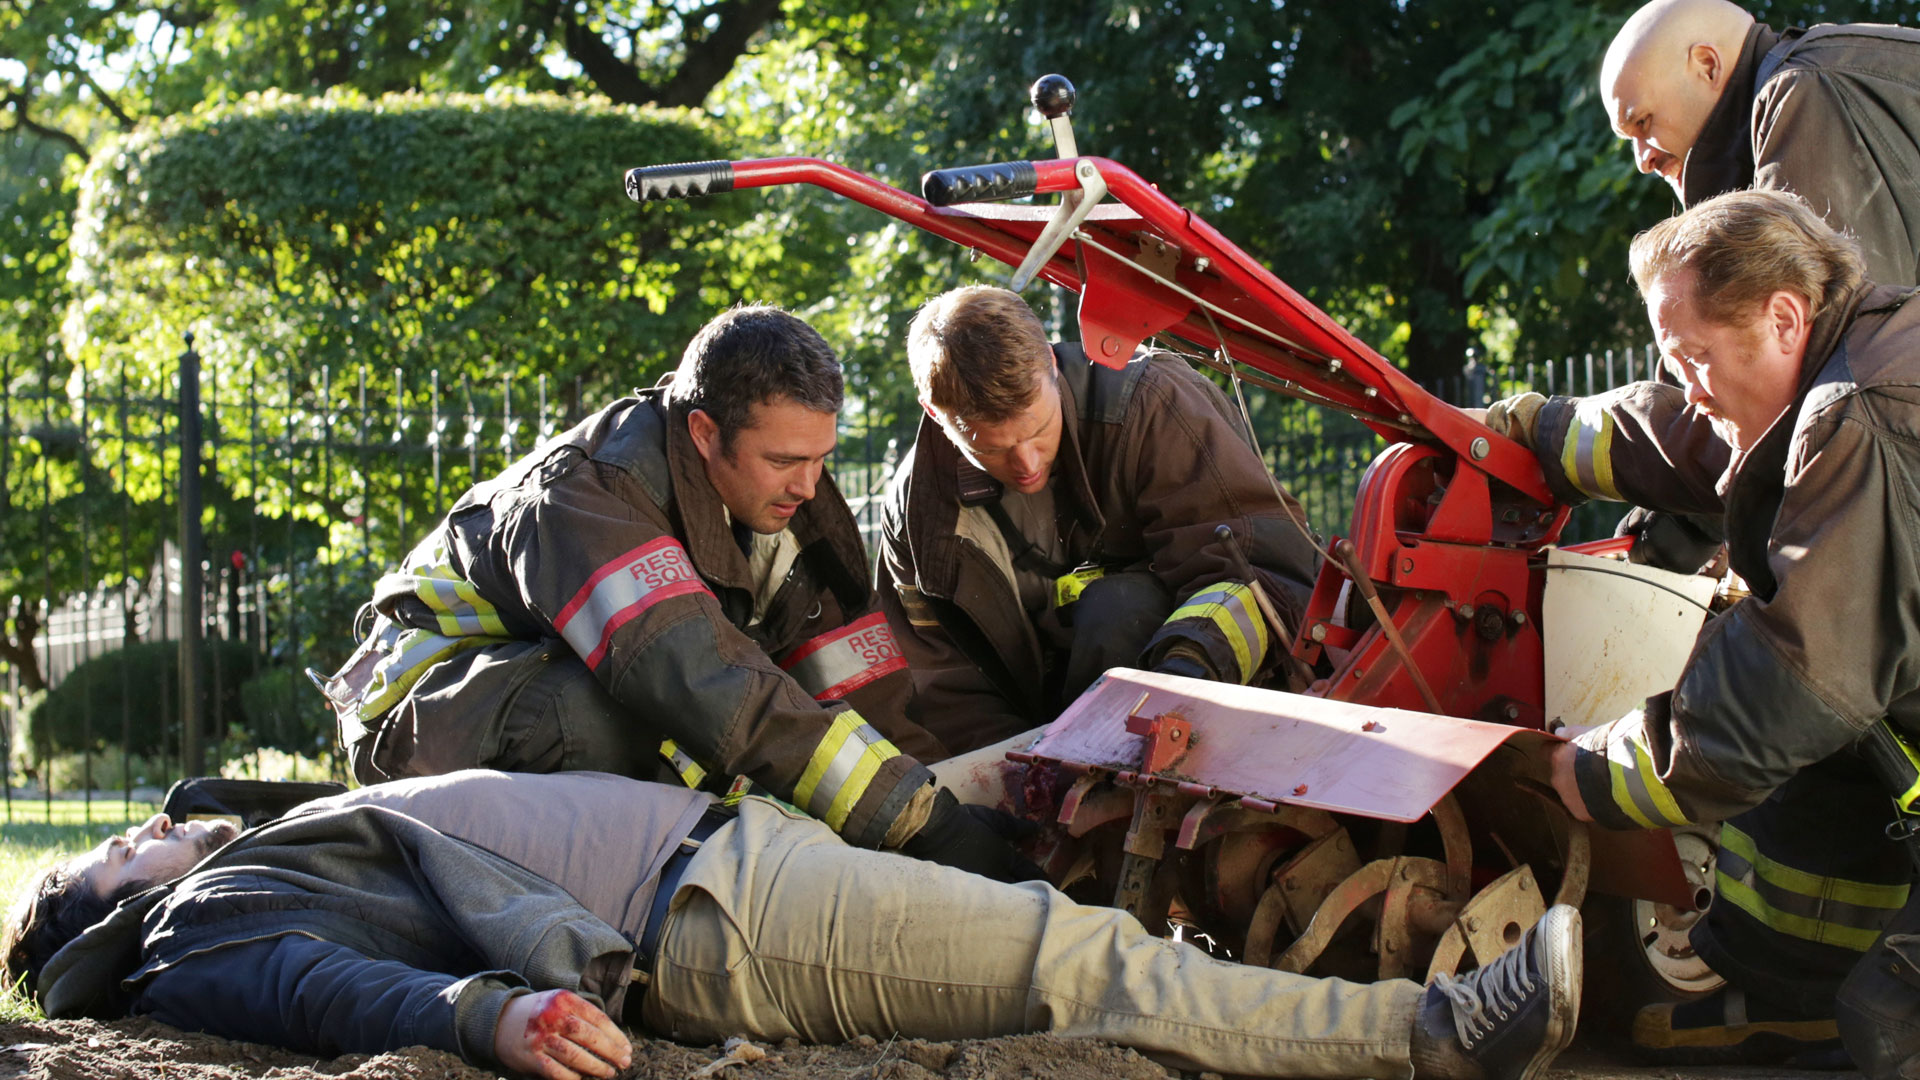 Watch A Power Move (Season 2, Episode 5) of Chicago Fire or get episode det...